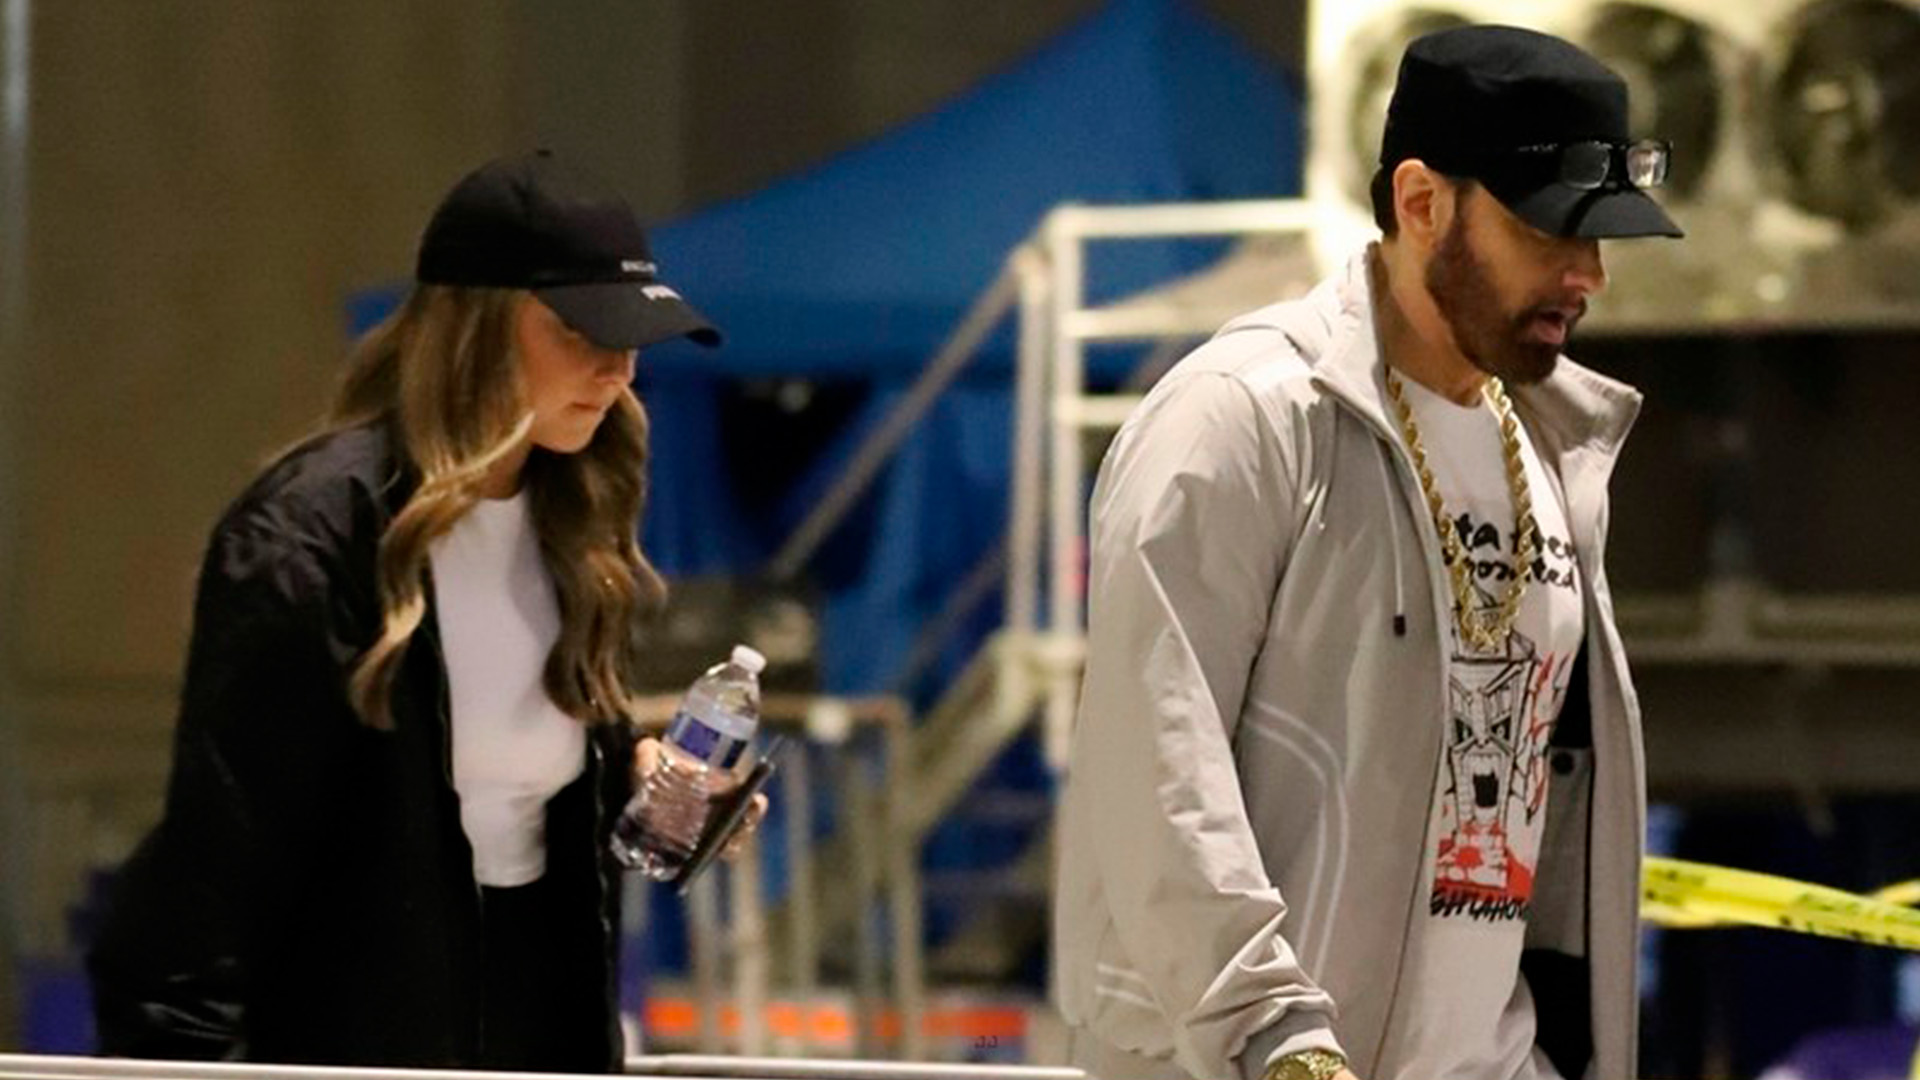 Watch: Eminem Appeared at the Hall of Fame Rehearsals in Good Company of His Daughter Hailie Jade